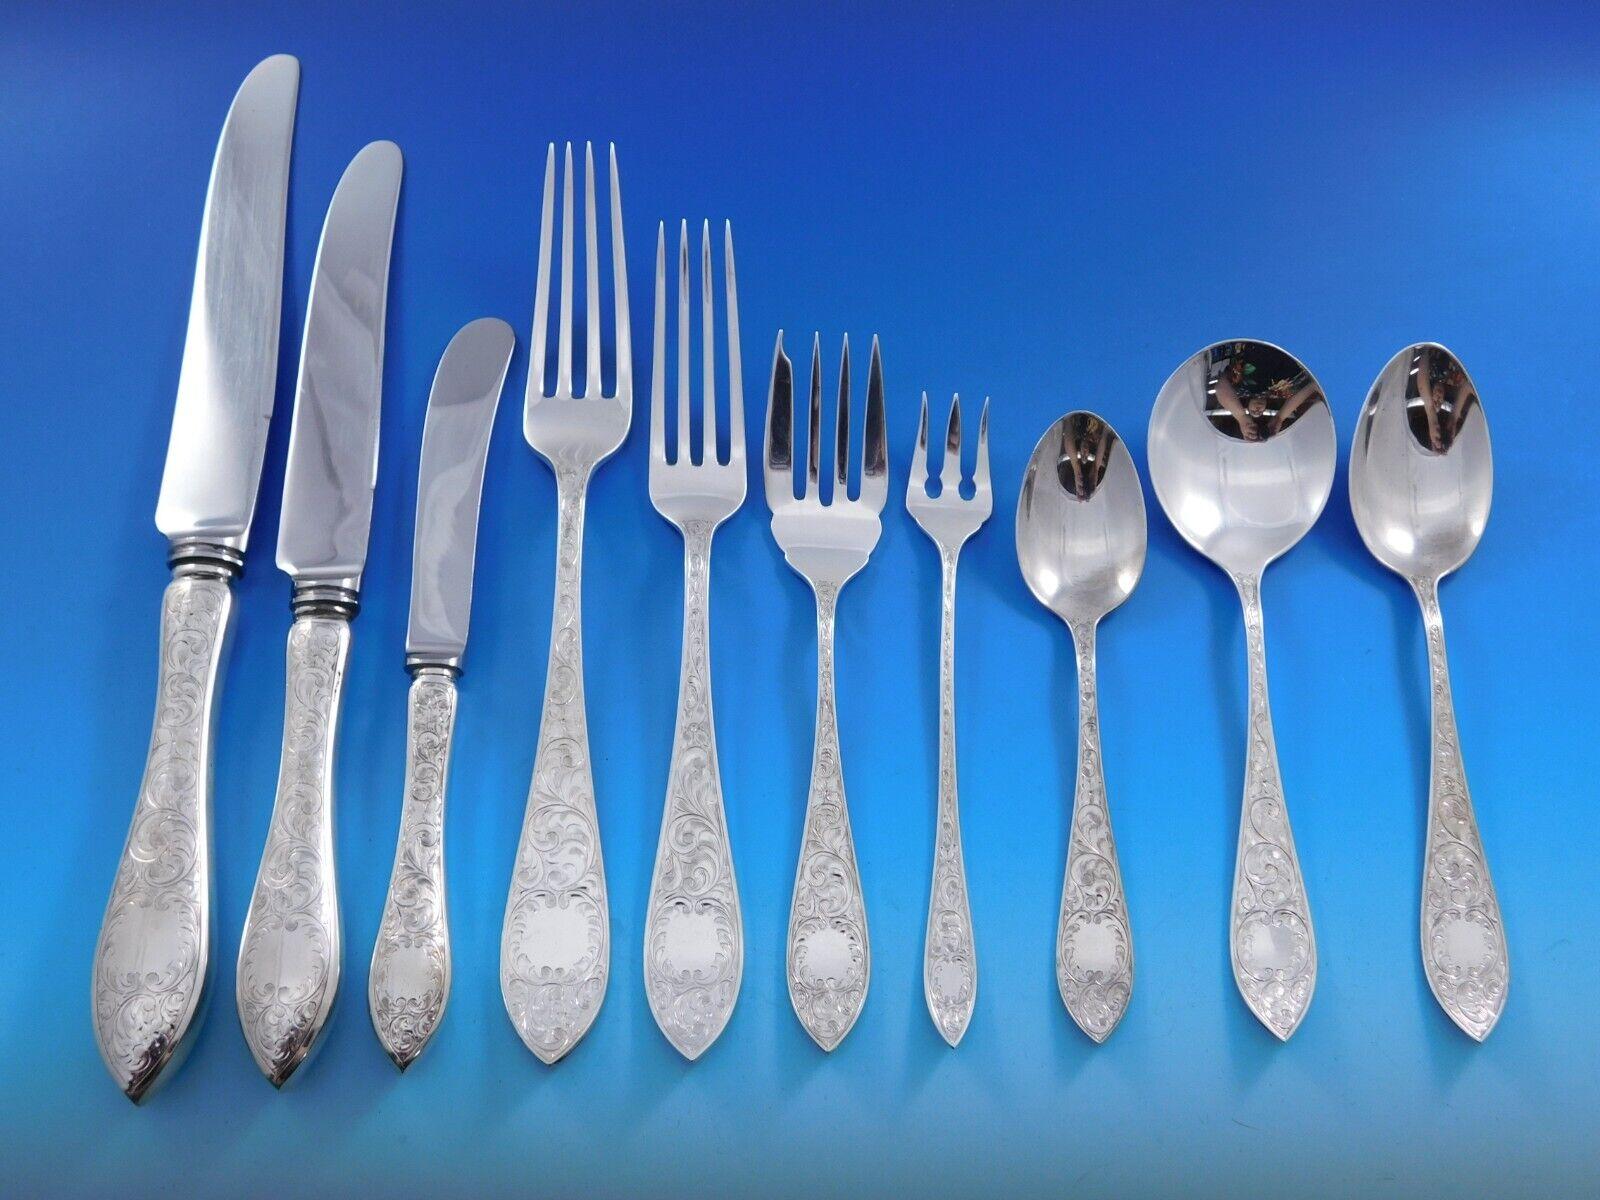 Monumental Tudor Scroll by Birks Canada sterling silver Flatware set with bright-cut design, 140 pieces. This set includes:

12 Large Dinner Knives, 10 1/8